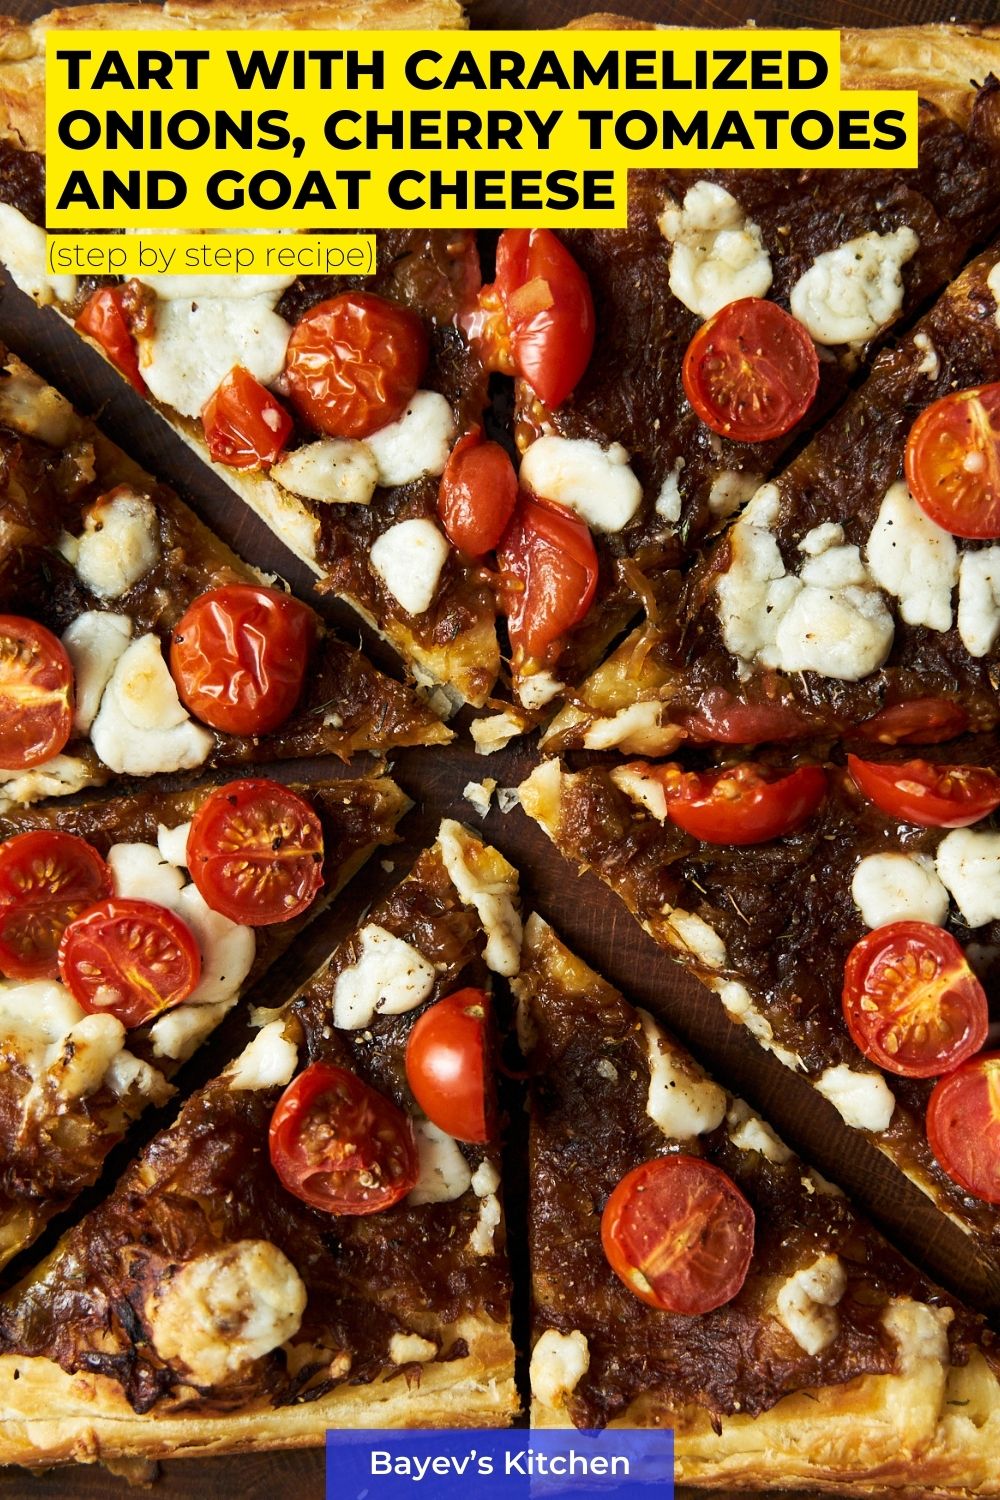 Tart with caramelized onions, cherry tomatoes and goat cheese by bayevskitchen.com